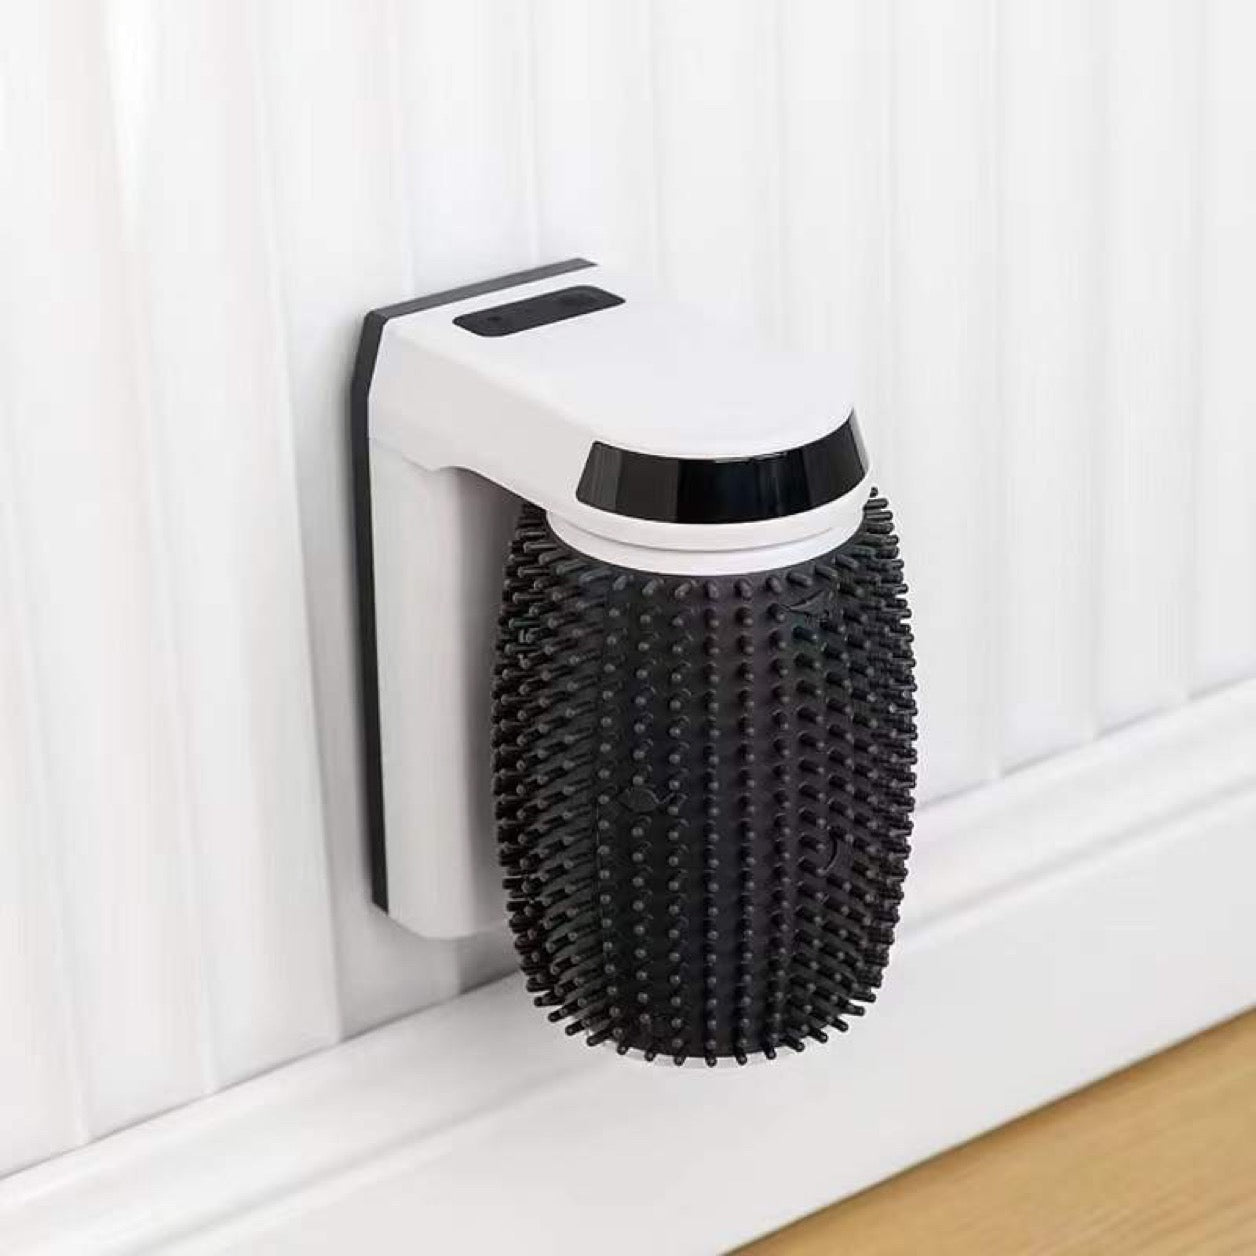 Wall-mounted cat brush and self groomer